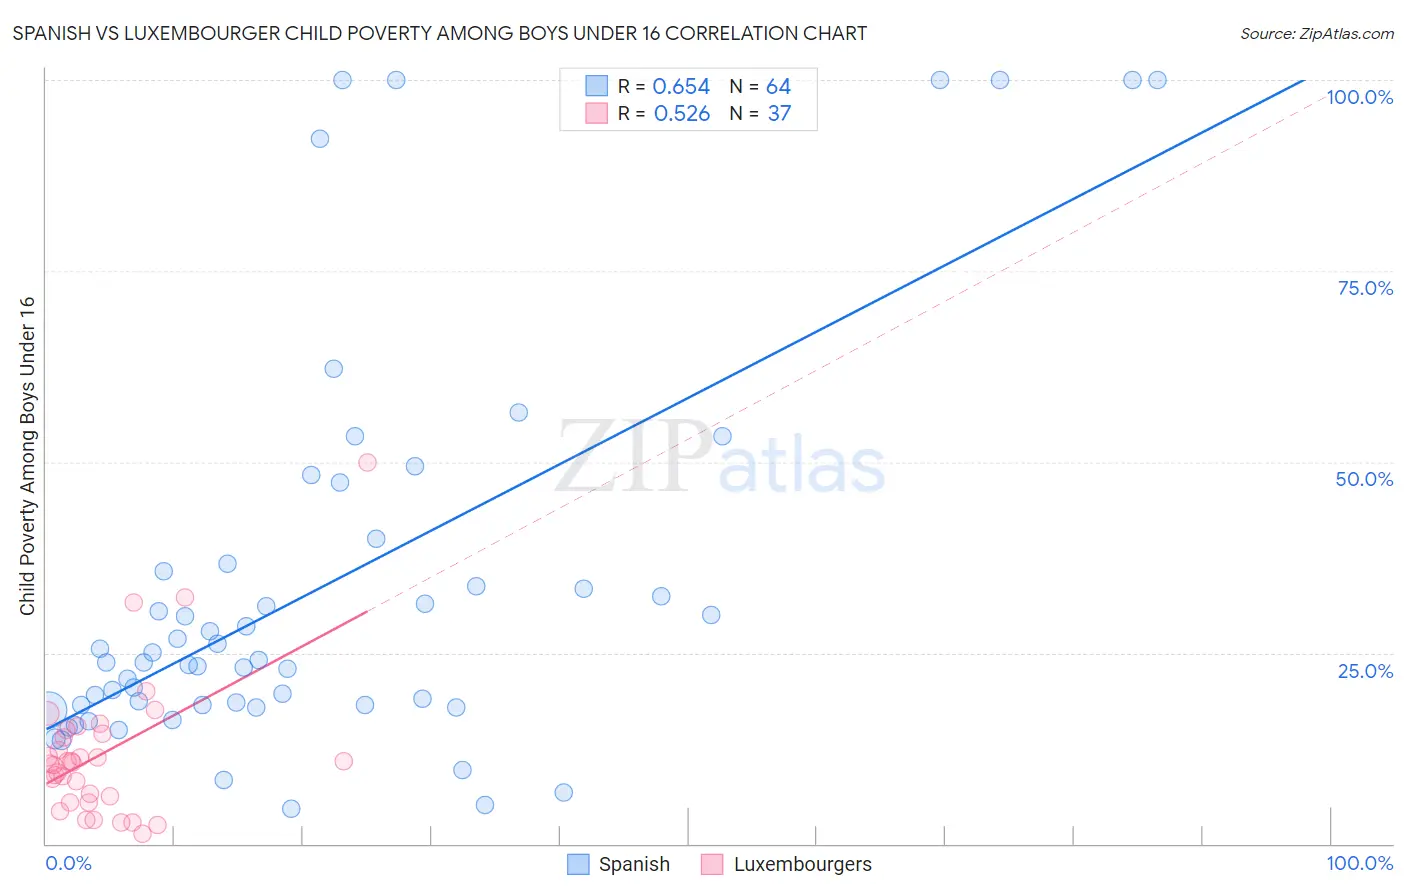 Spanish vs Luxembourger Child Poverty Among Boys Under 16